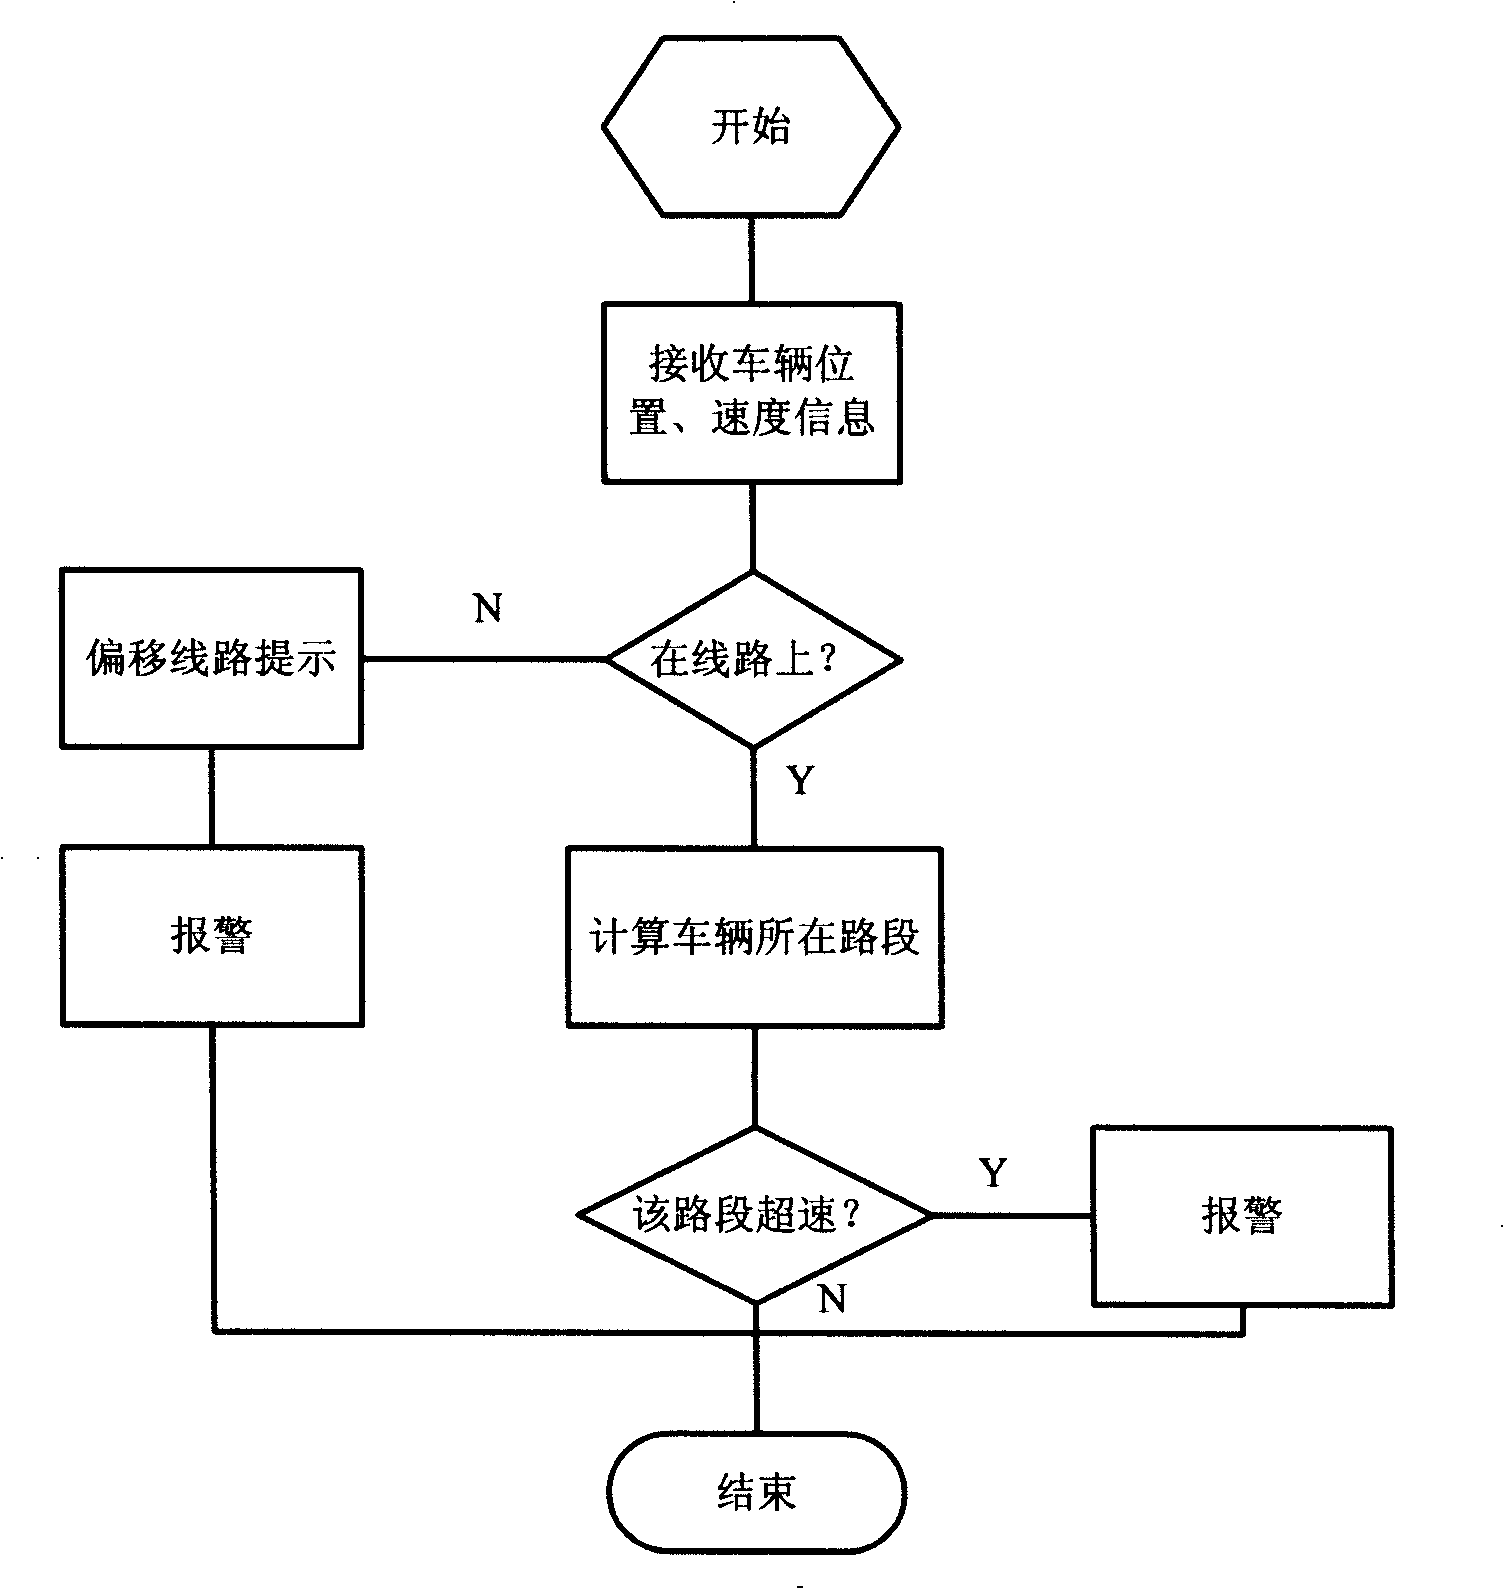 Circuit monitoring method based on uploading position and velocity information of GPS terminal